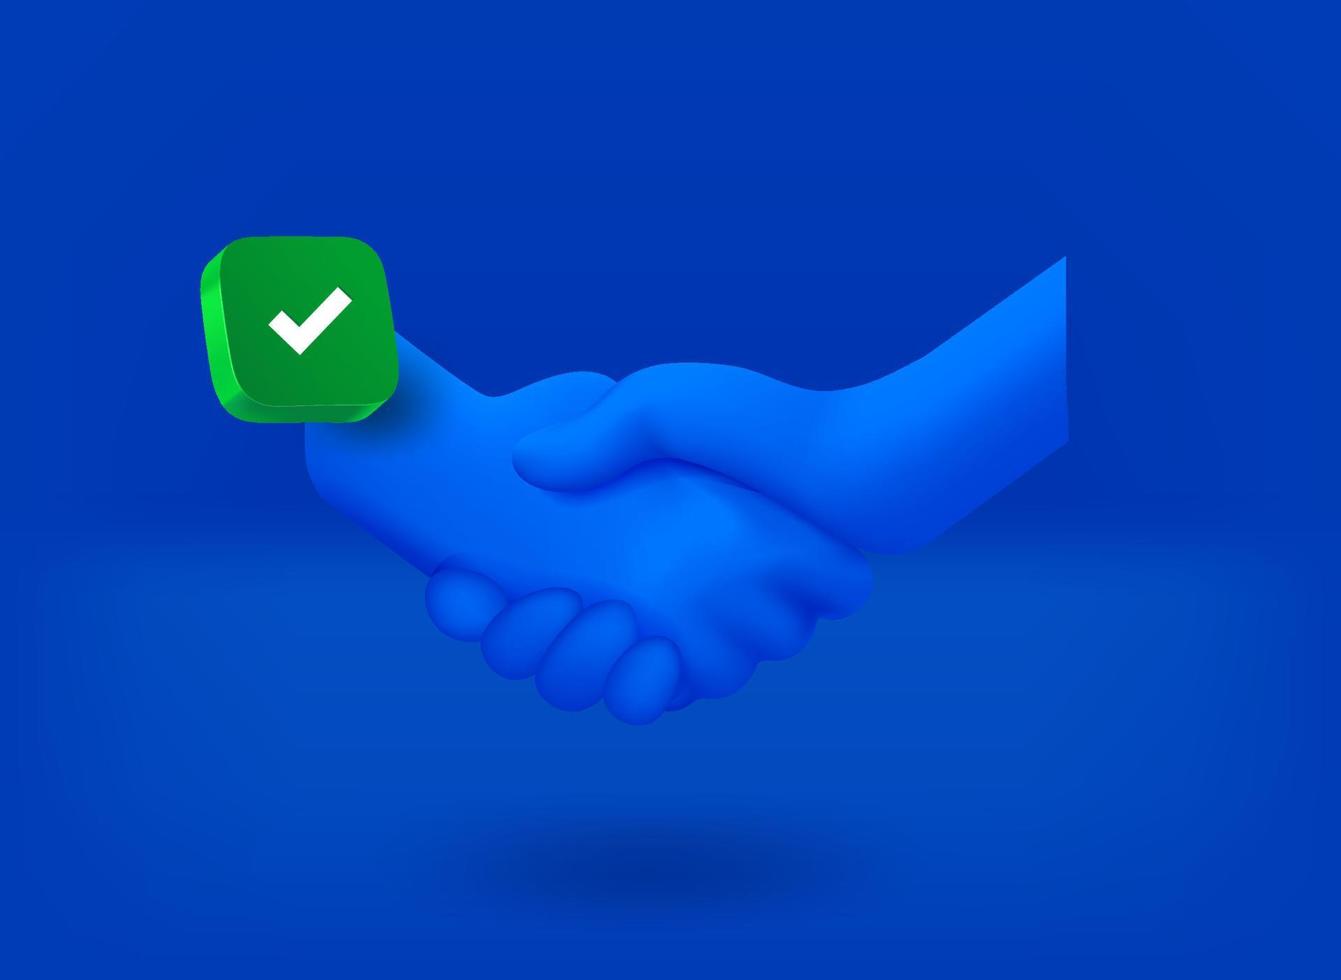 Shake hands icon with green checkmark pictogram. 3d vector illustration